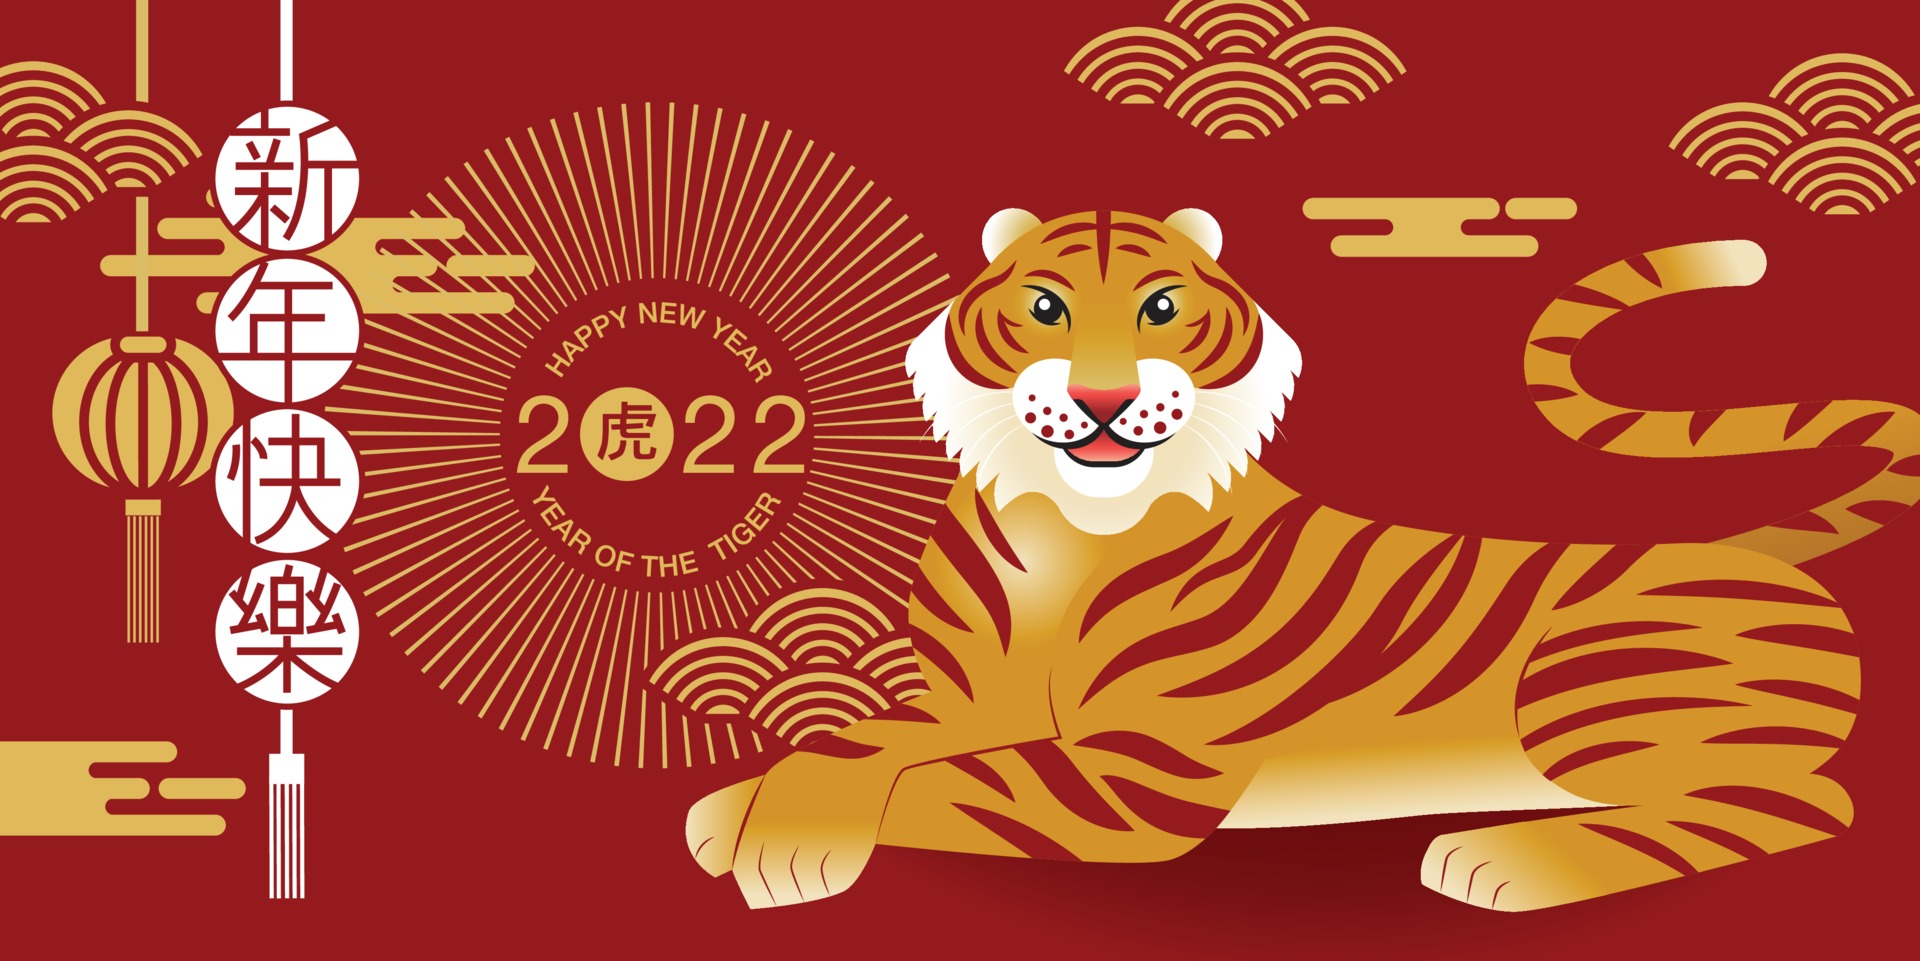 Happy Chinese New Year 2022: The Year of the Tiger